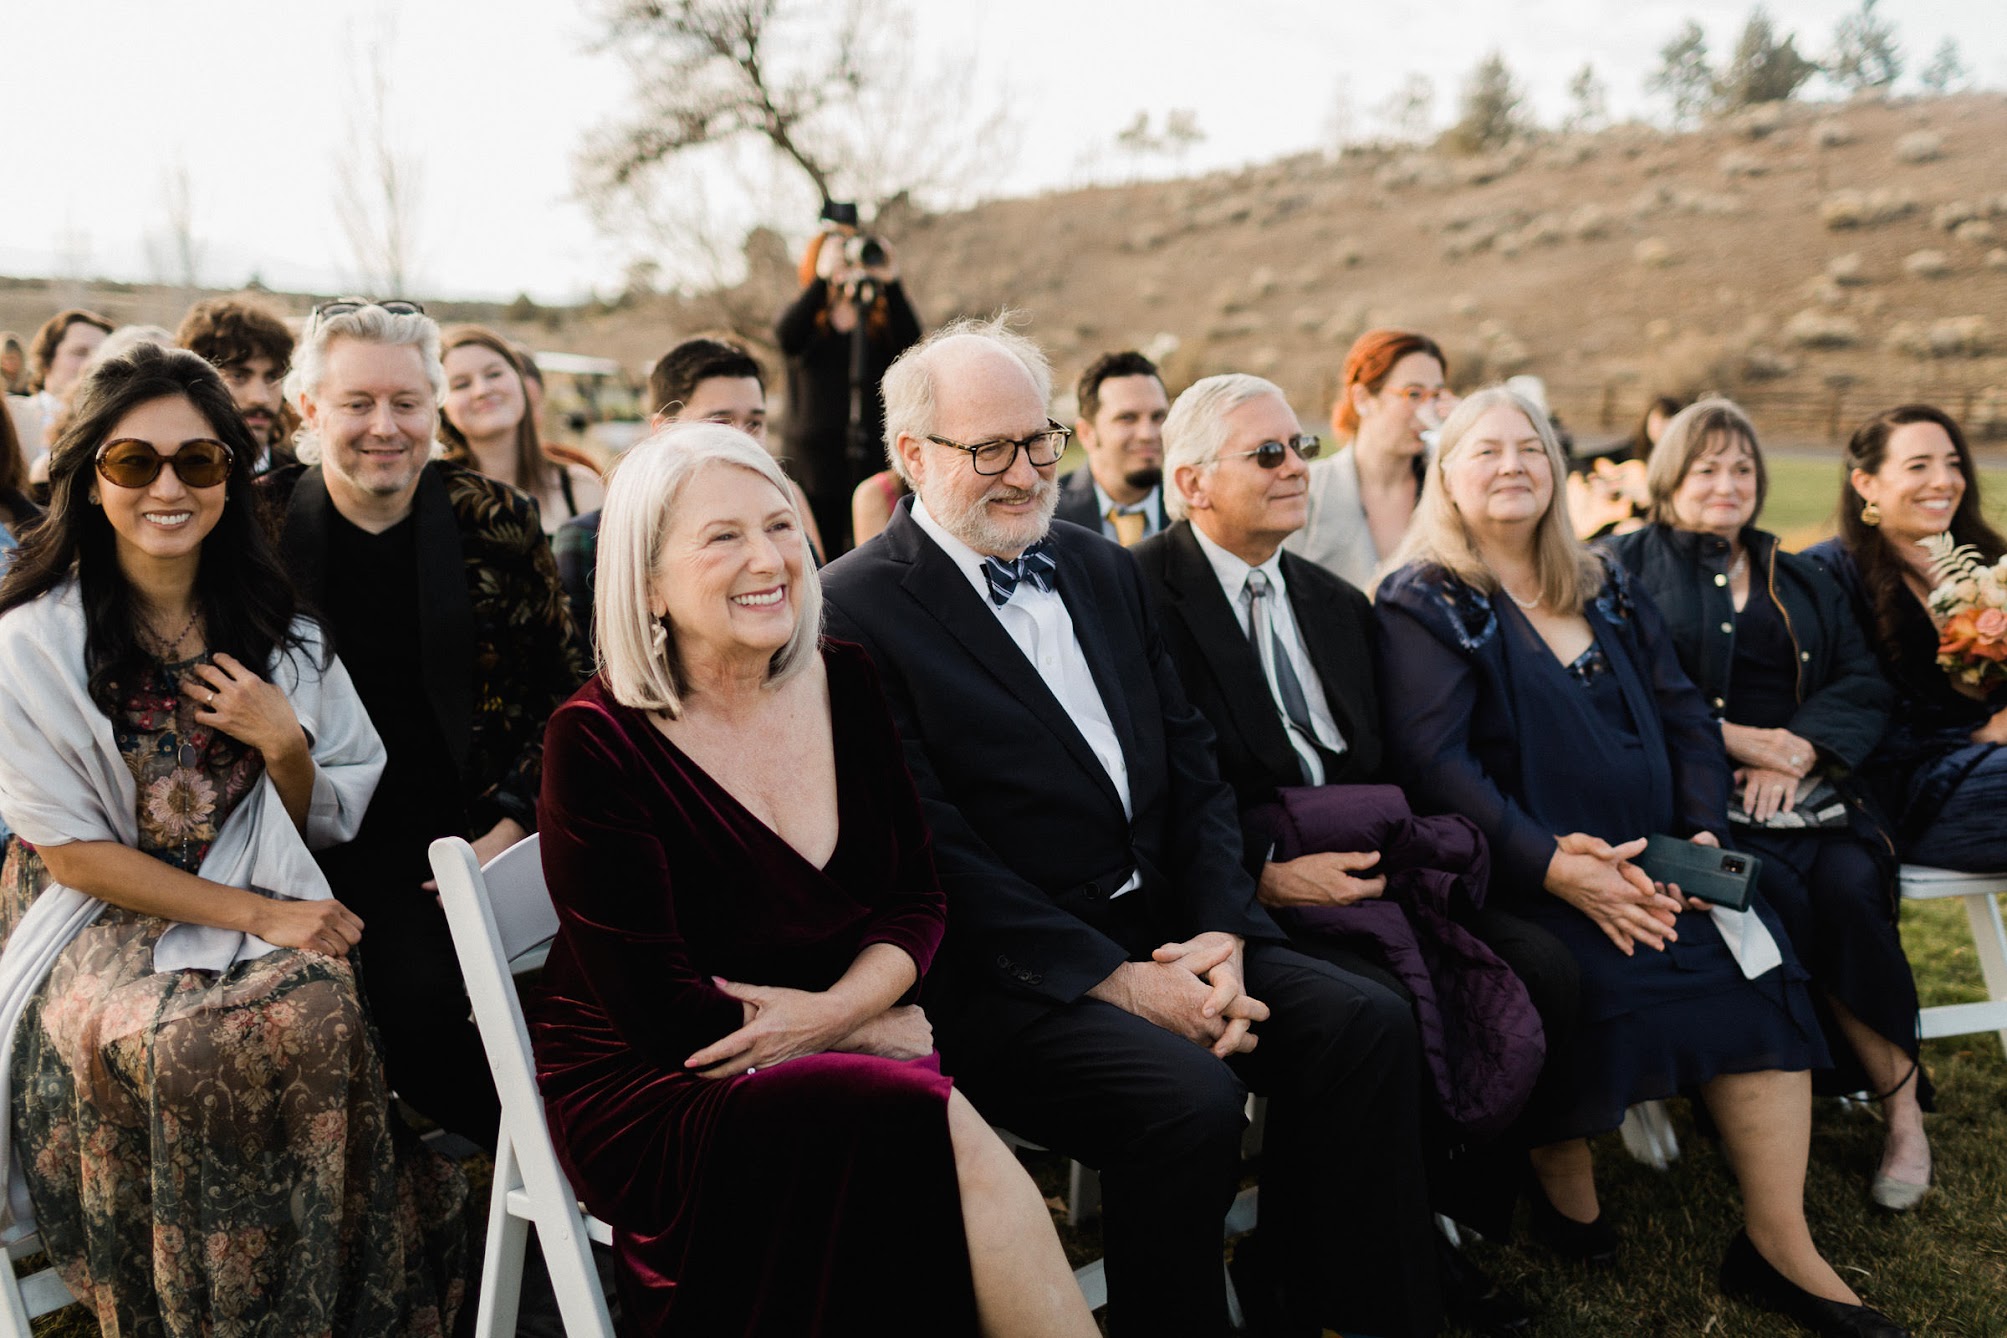 Guests smiling while sitting down watching the cermeony 